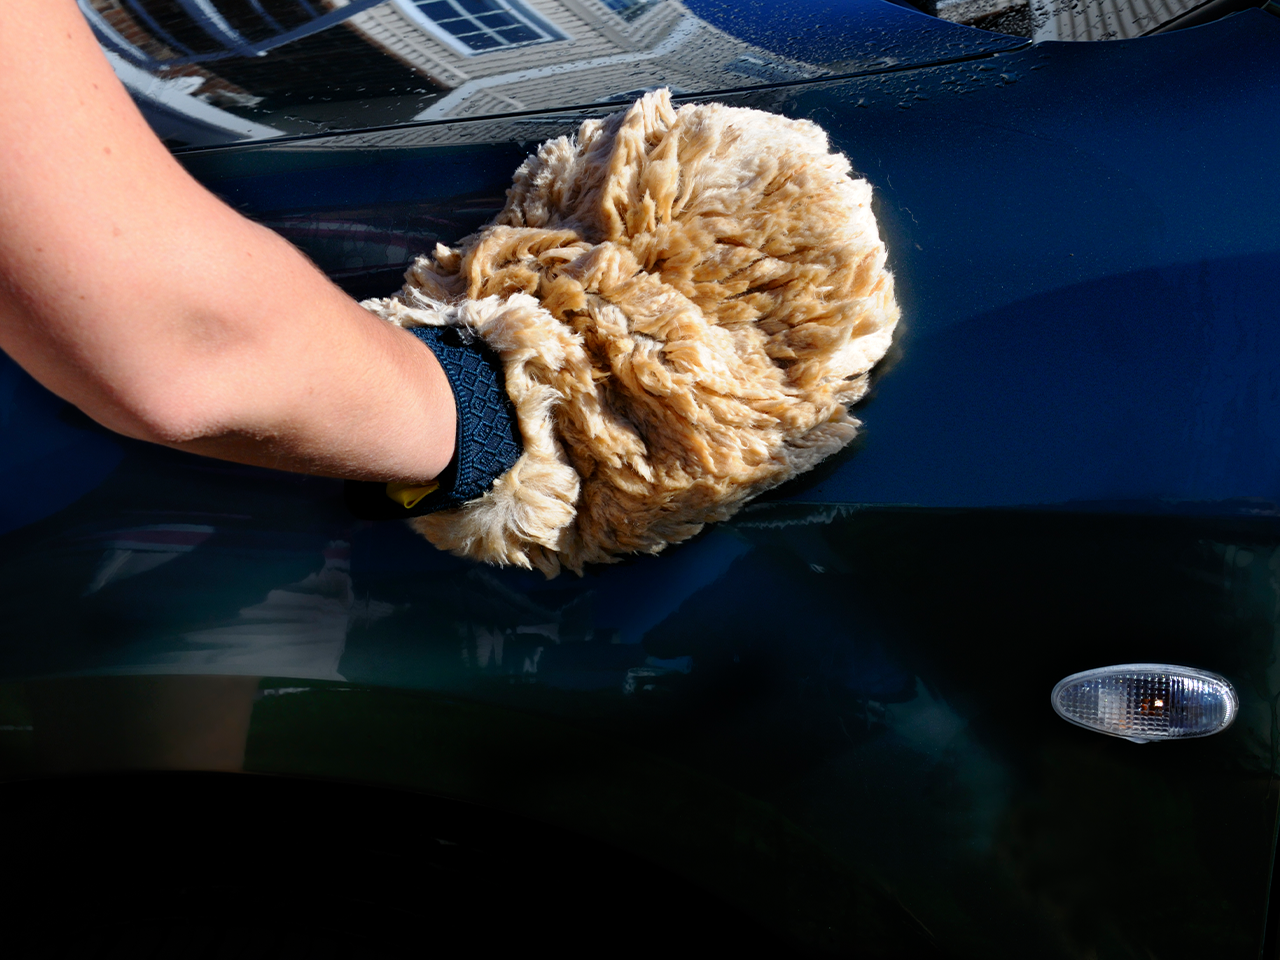 Wash Sponge or Wash Mitt: Which is Better for Washing Your Car?